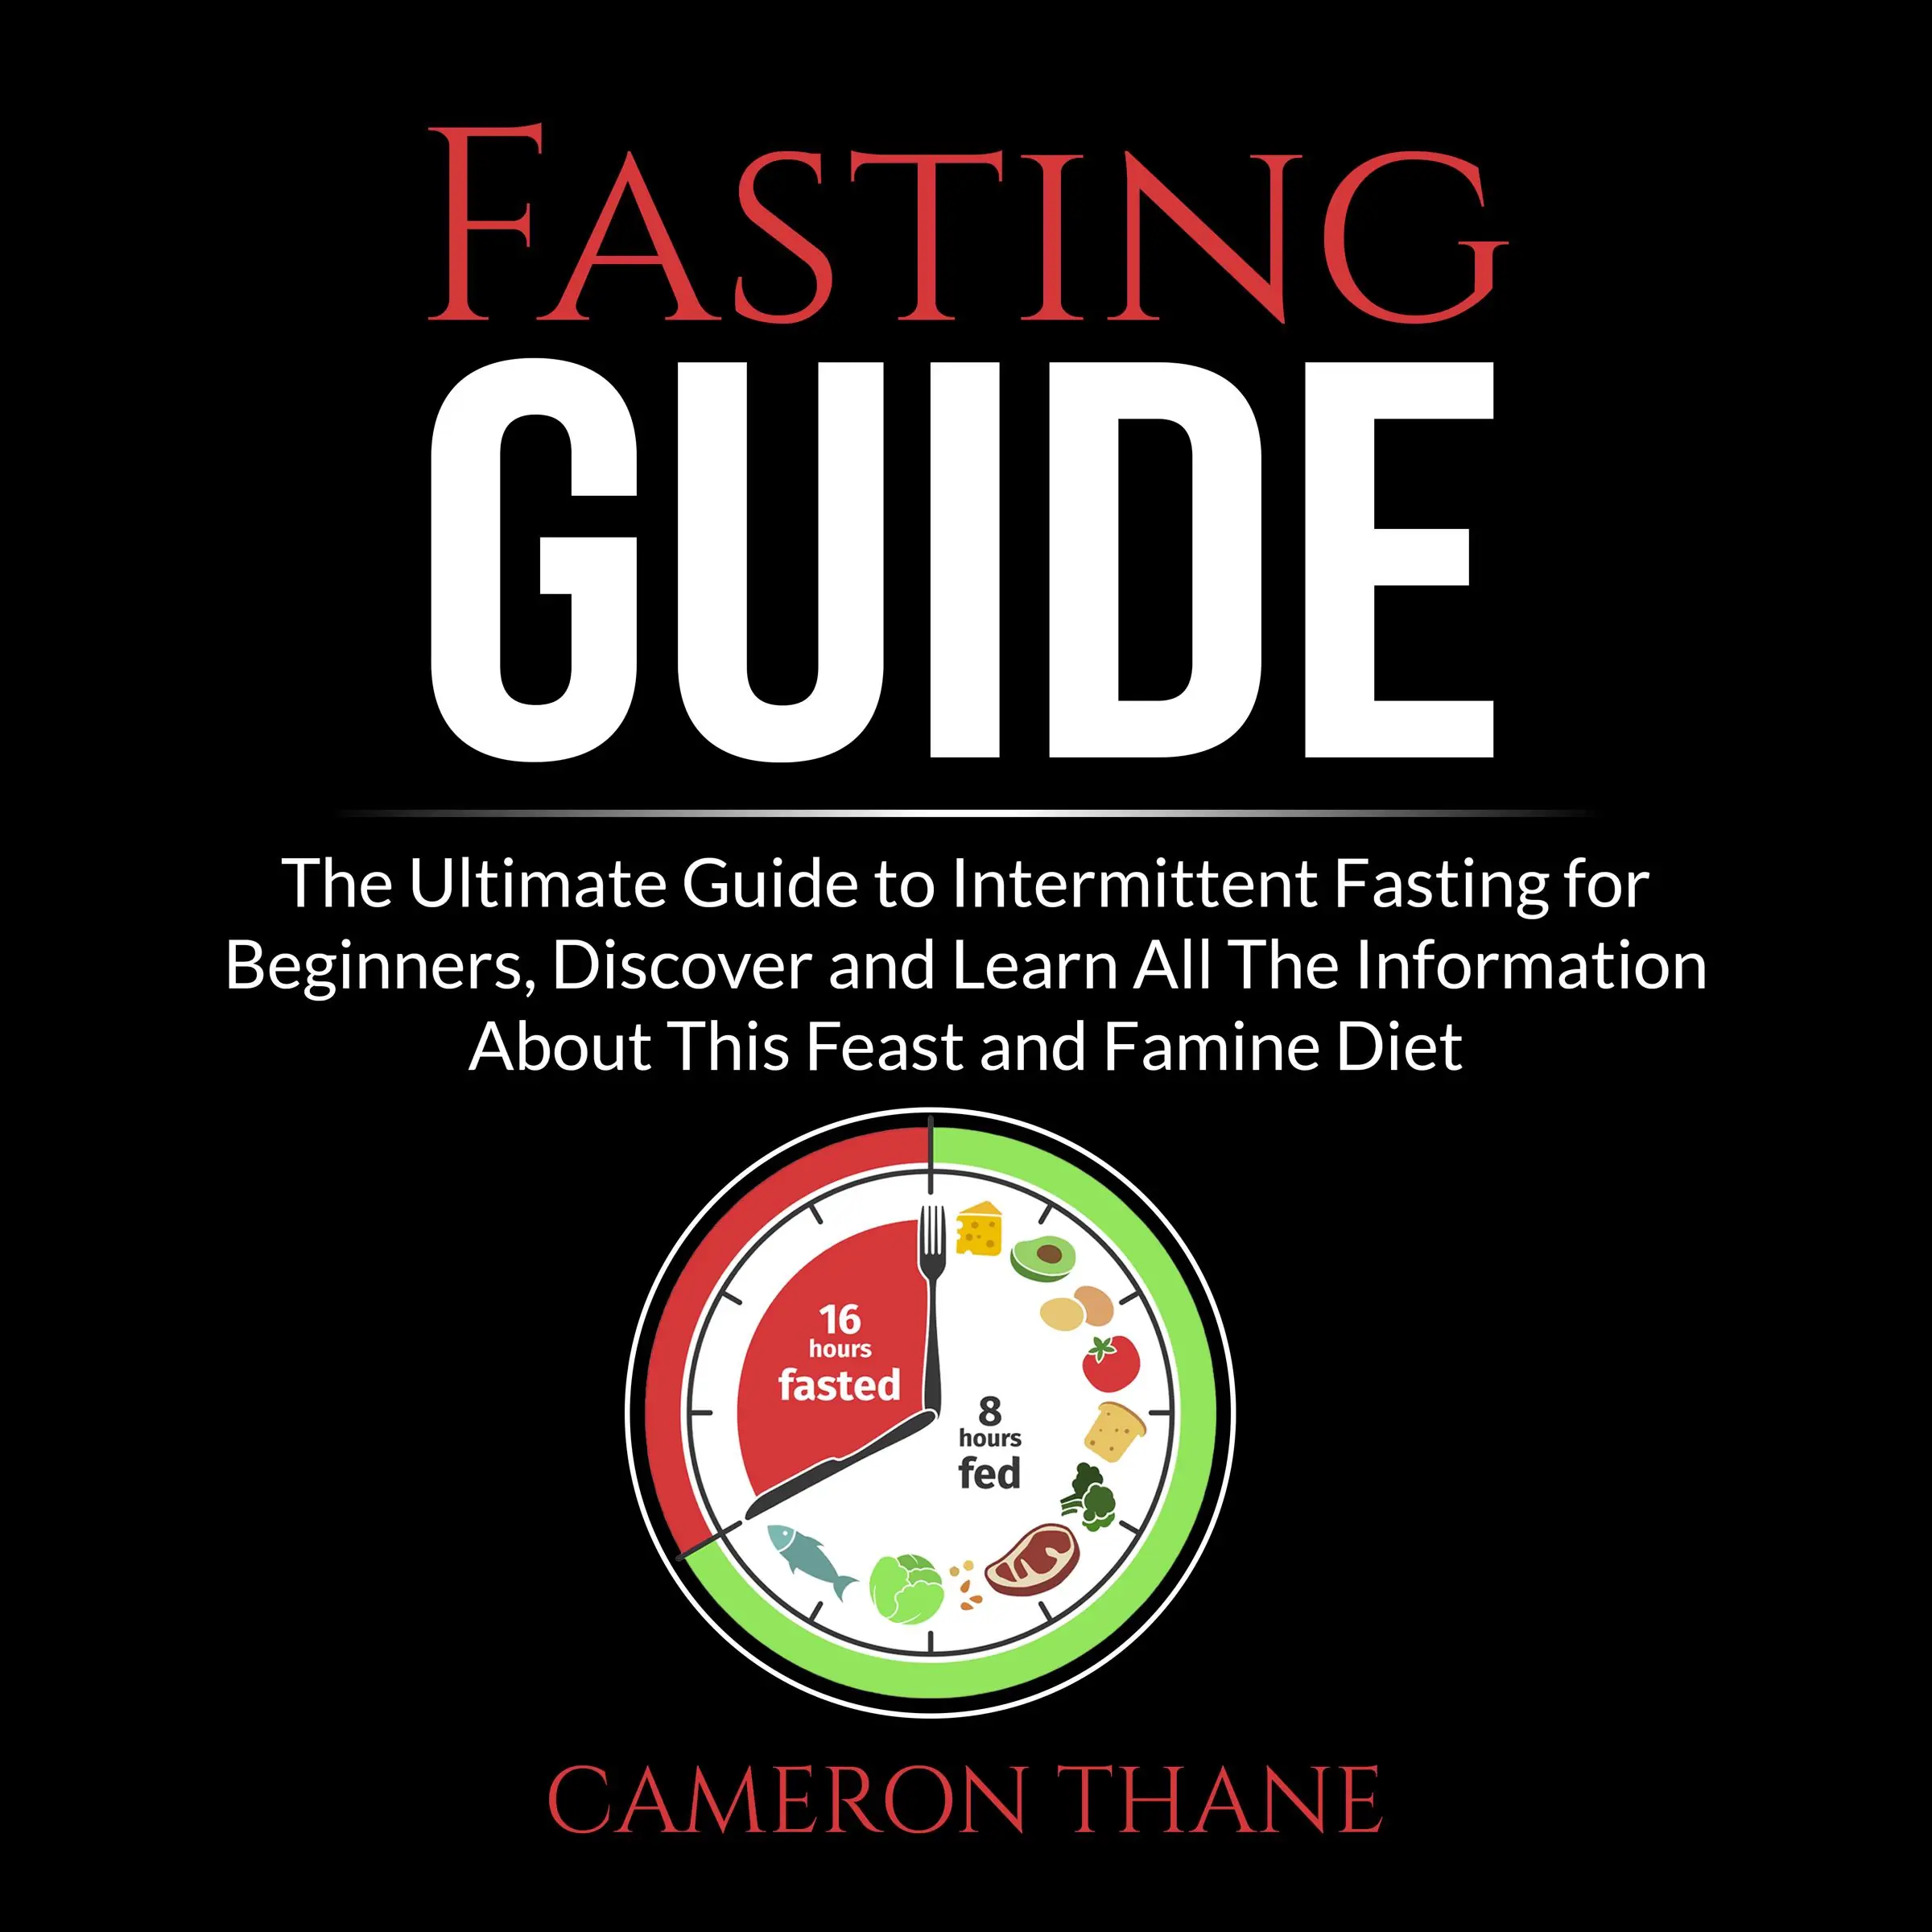 Fasting Guide Audiobook by Cameron Thane